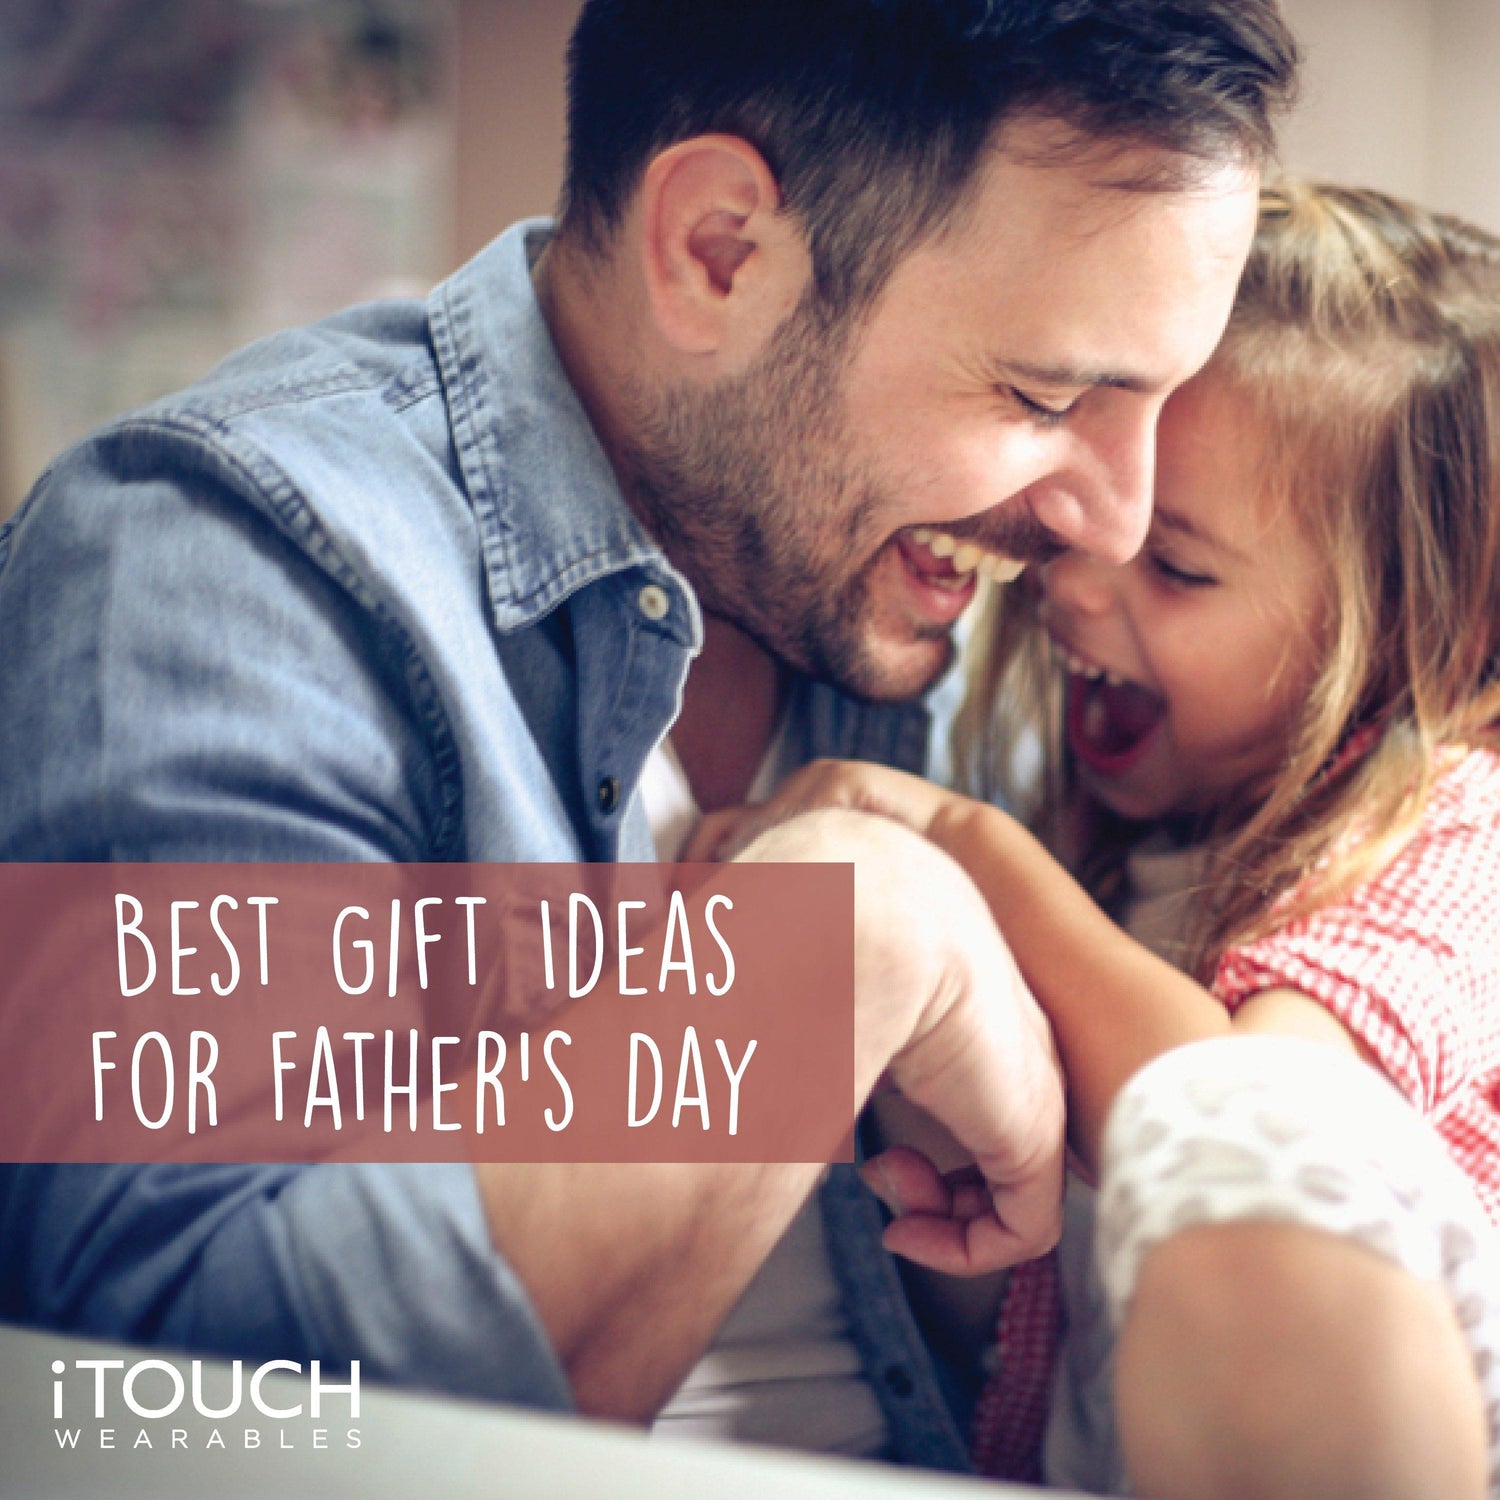 Best Gift Ideas For Father's Day - iTOUCH Wearables